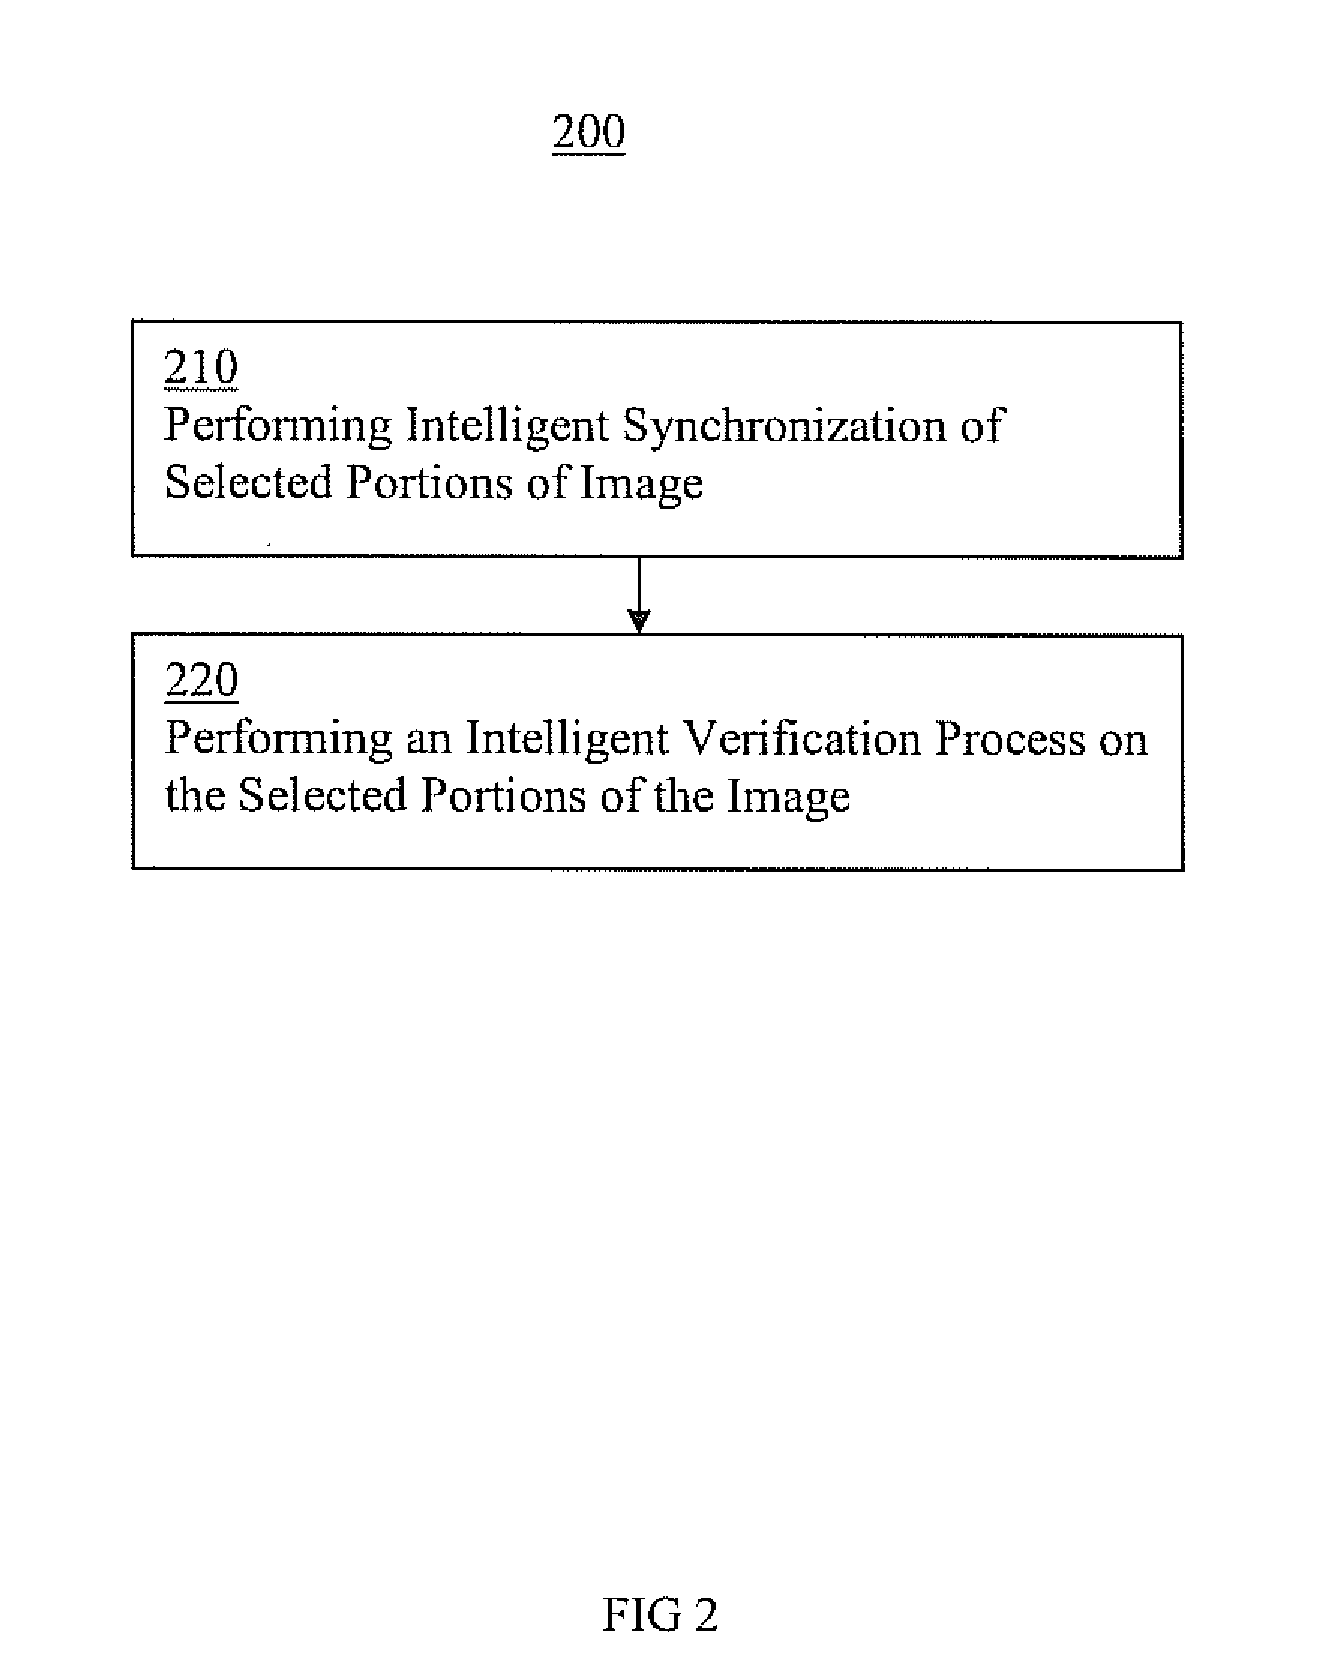 Storage replication systems and methods